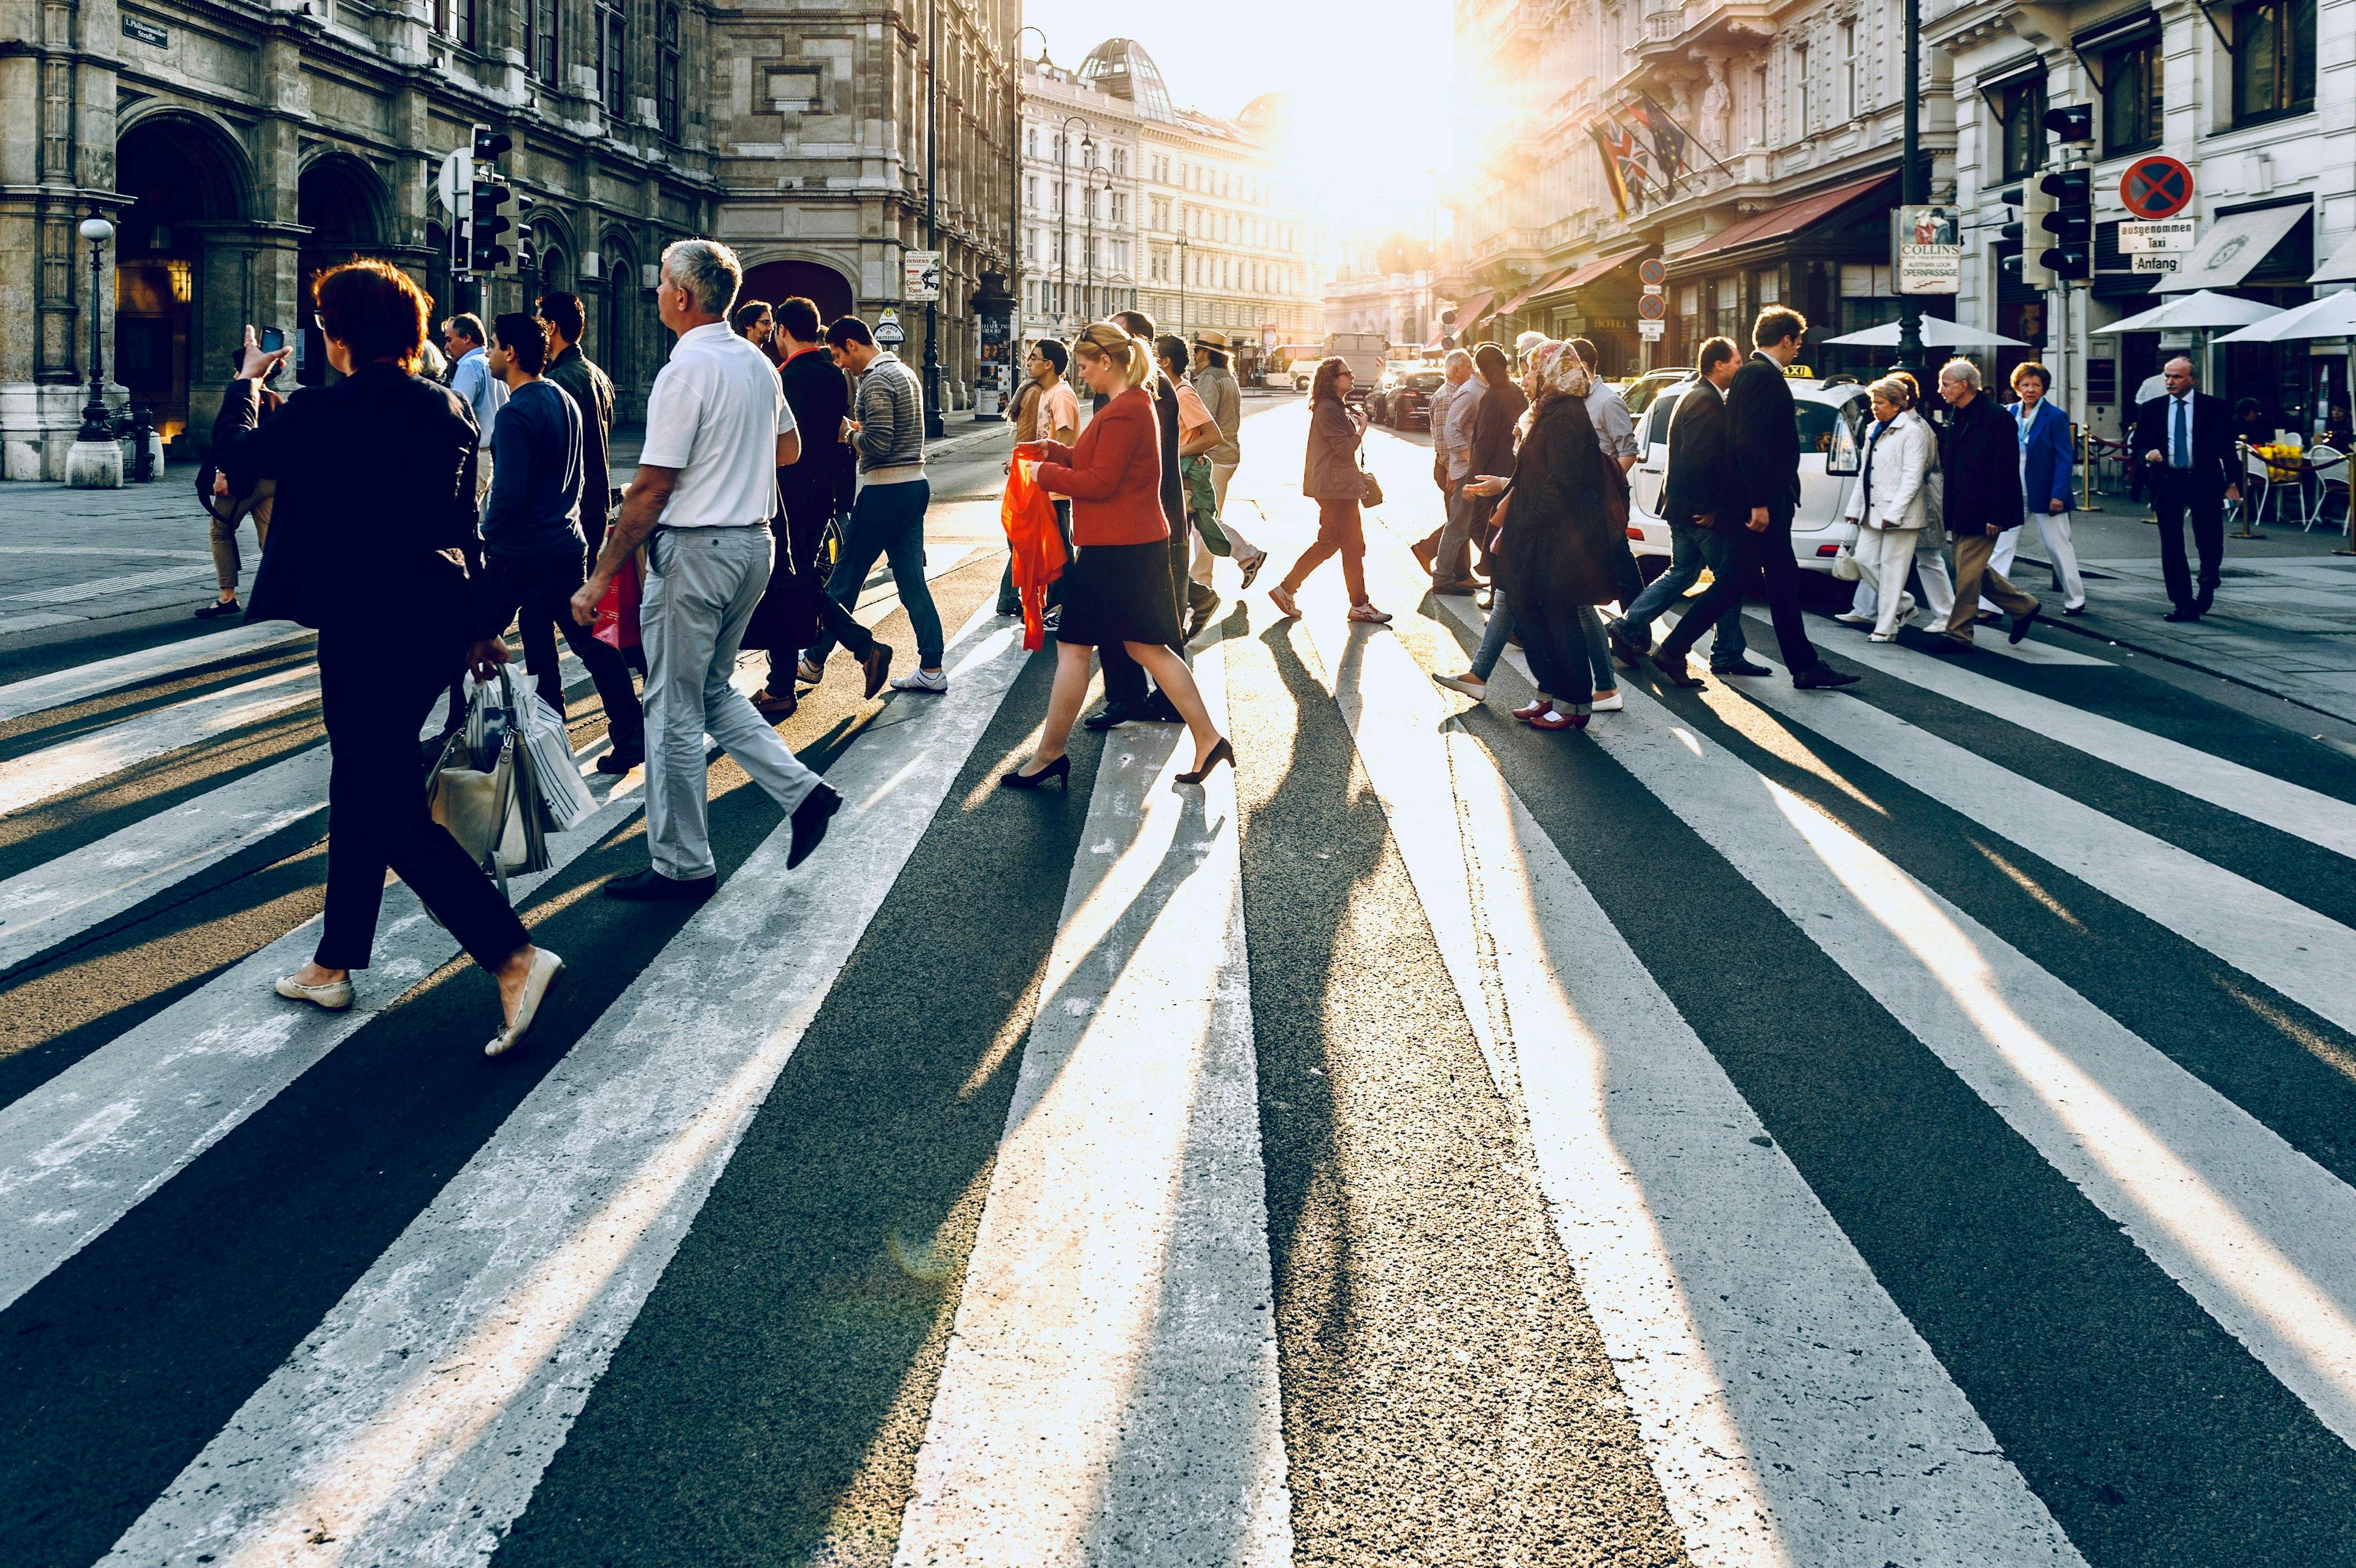 A dynamic scene of pedestrians crossing a zebra crossing in a bustling city street at sunset. The long shadows and golden sunlight create a vivid contrast with the white stripes of the crosswalk, highlighting the movement and rhythm of urban life.